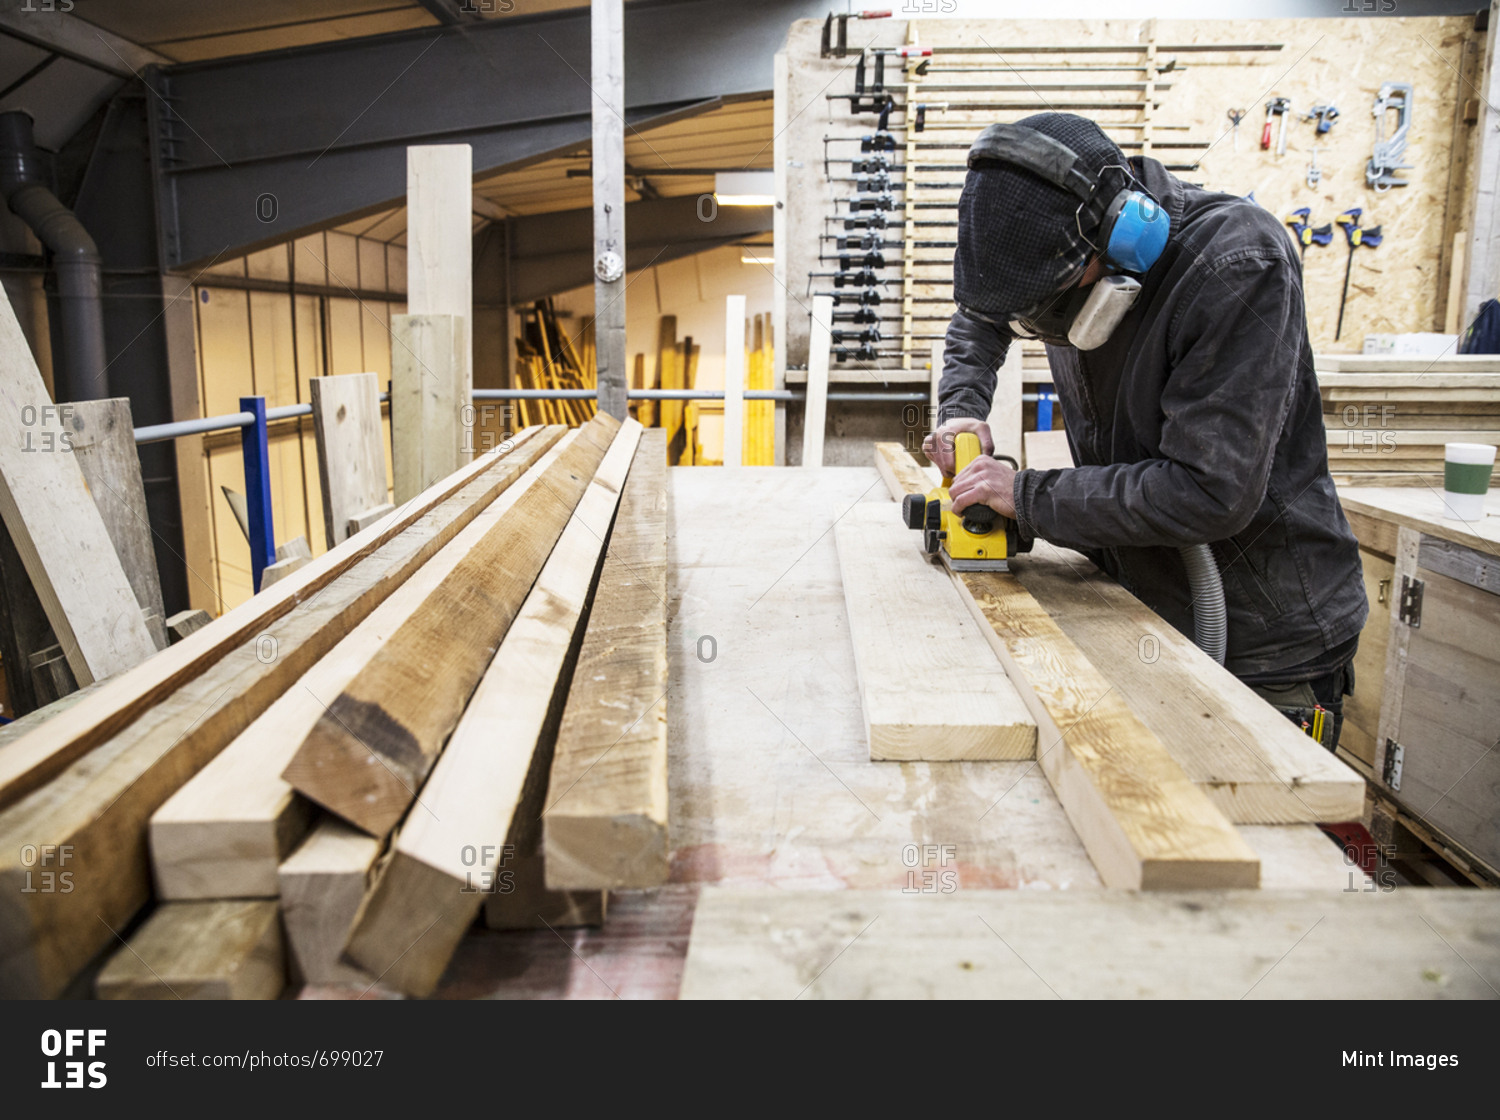 Man wearing ear protectors, protective goggles and dust mask standing in a warehouse, sanding planks of recycled wood